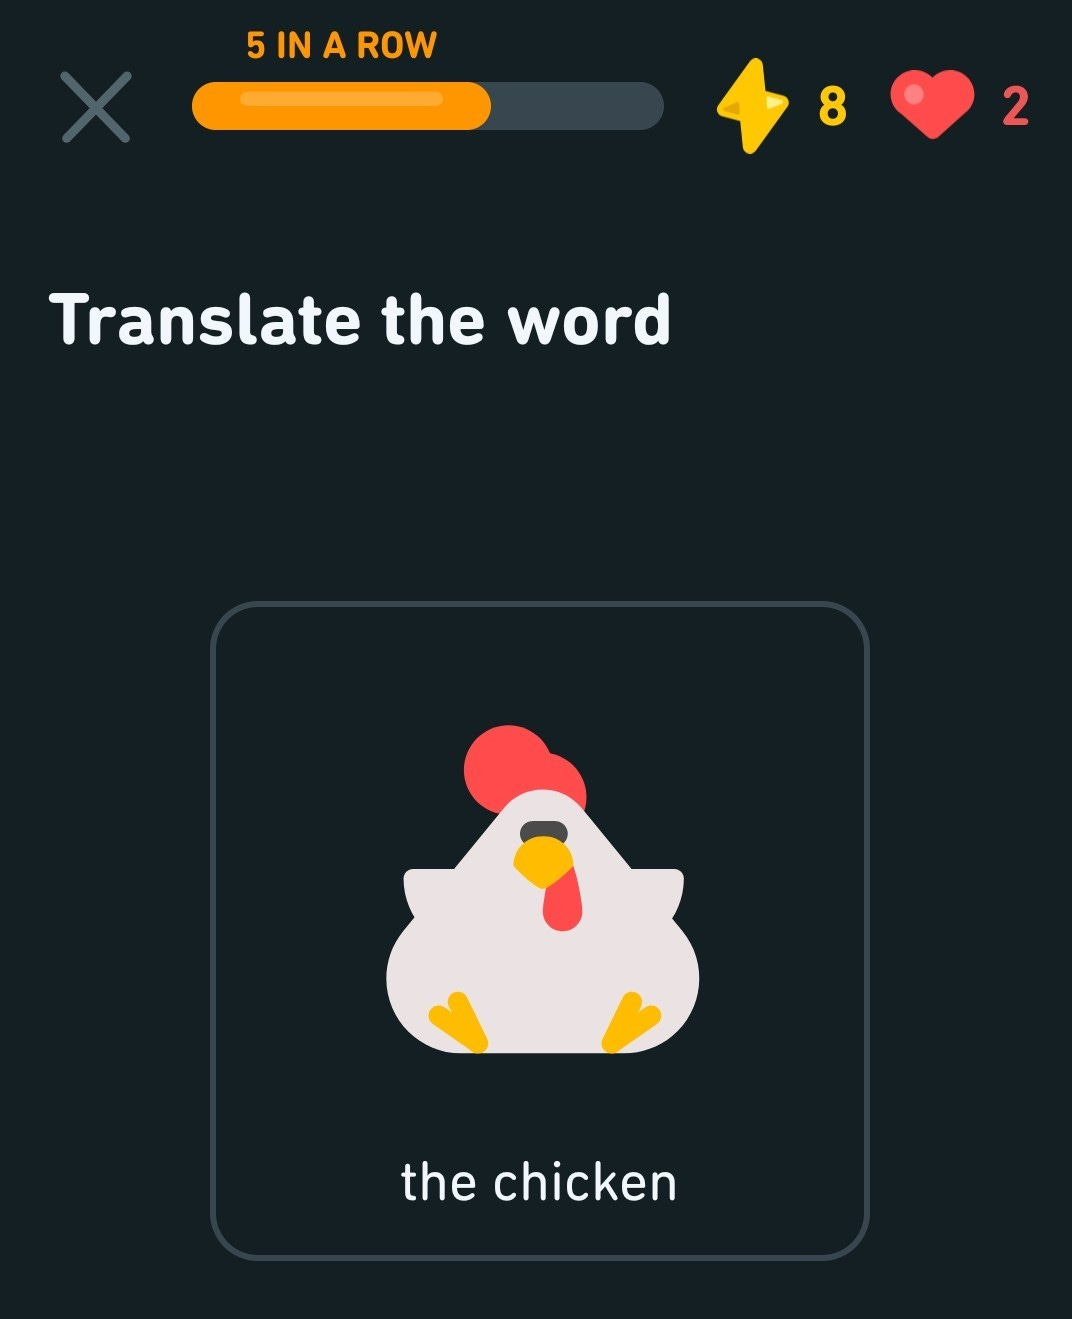 Translate the word: The chicken.